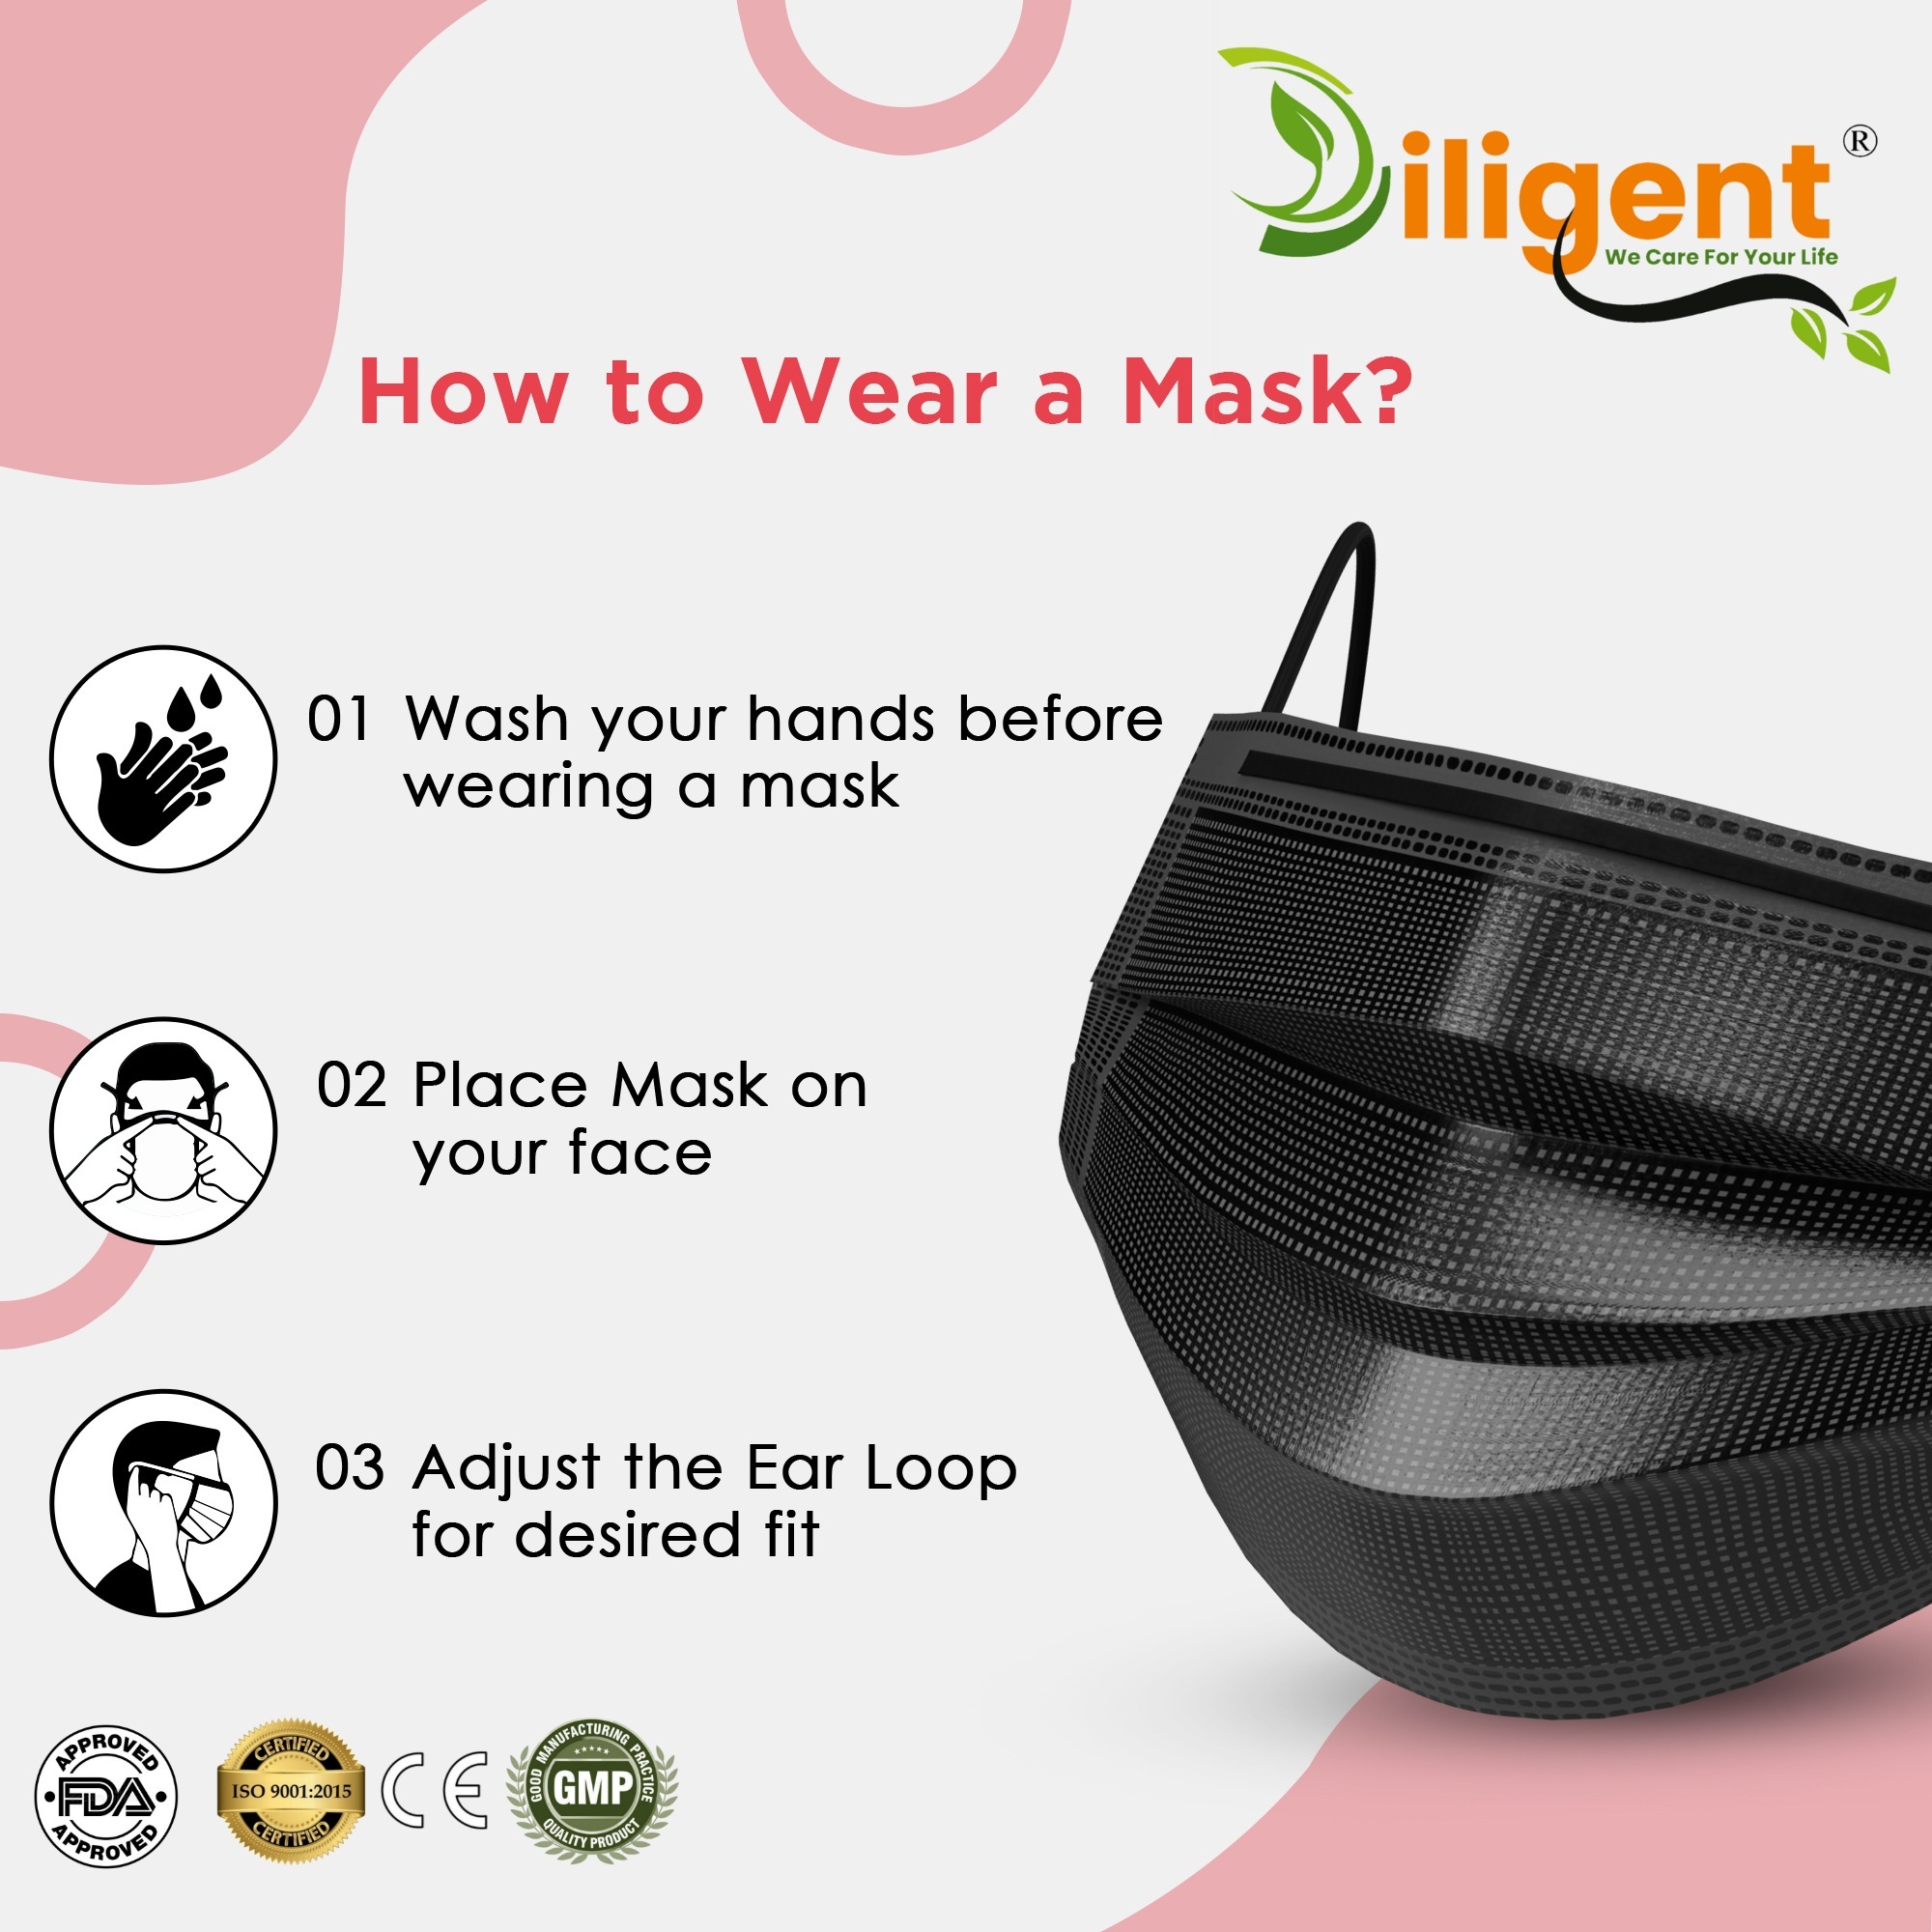 Black 3Ply Surgical Mask Certified ByFDA,CE,WHO-GMP & ISO